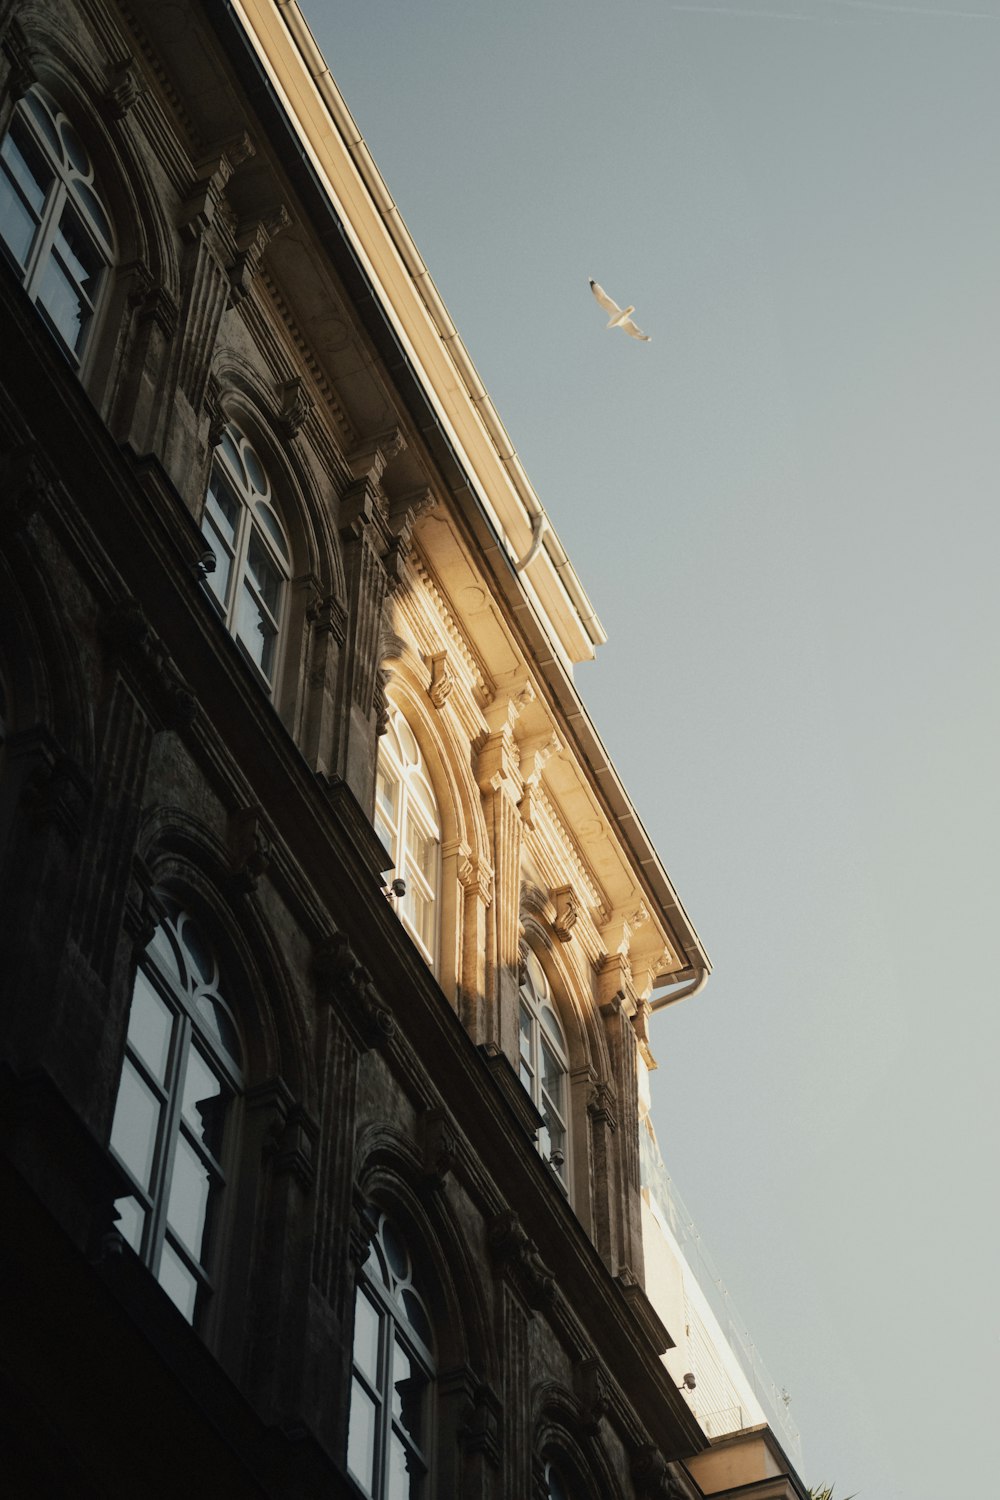 a plane flying over a building with windows